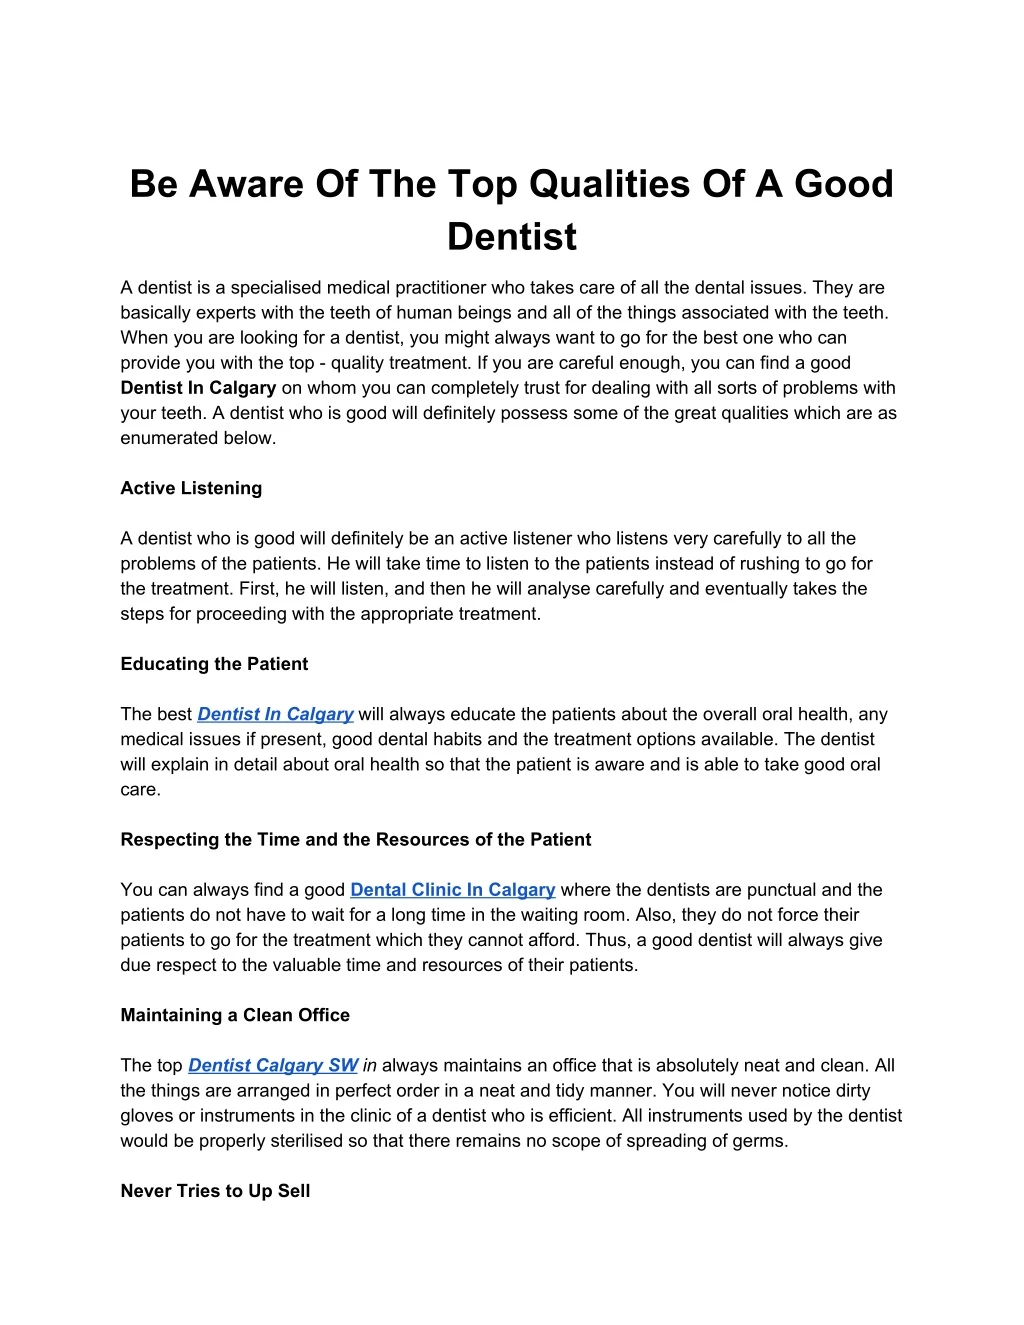 be aware of the top qualities of a good dentist